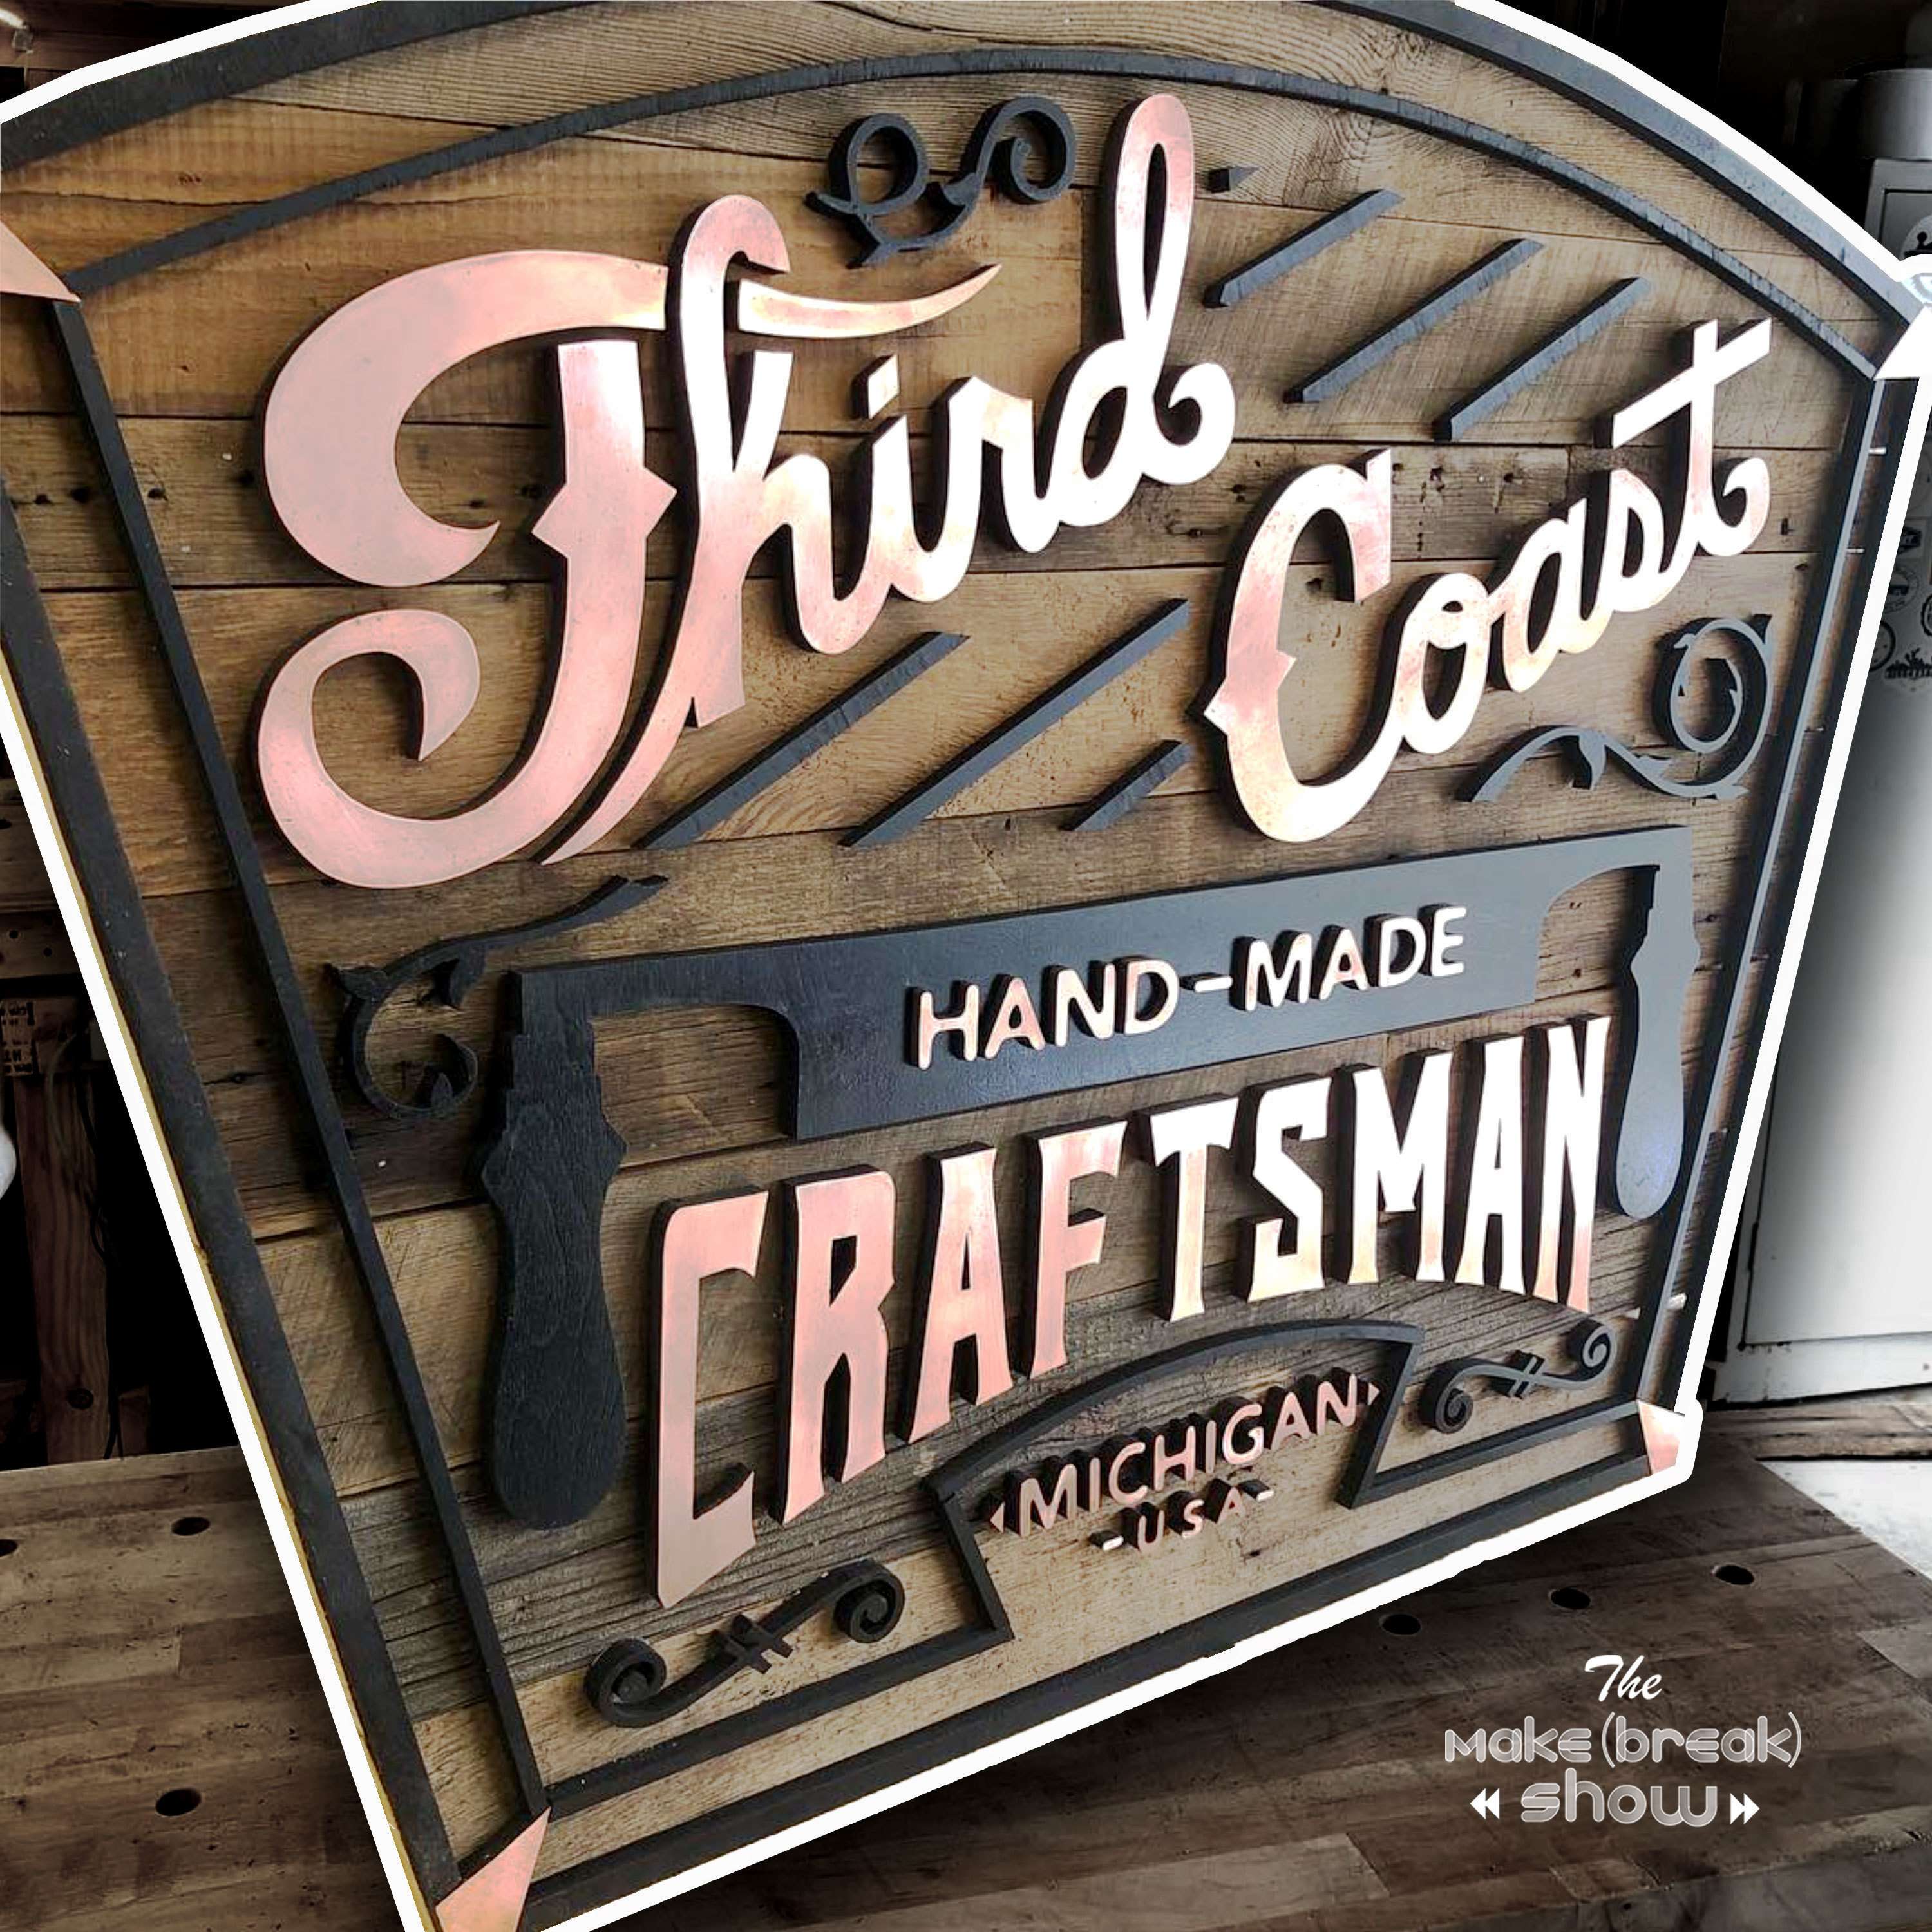 047: Going full-time with the Third Coast Craftsman